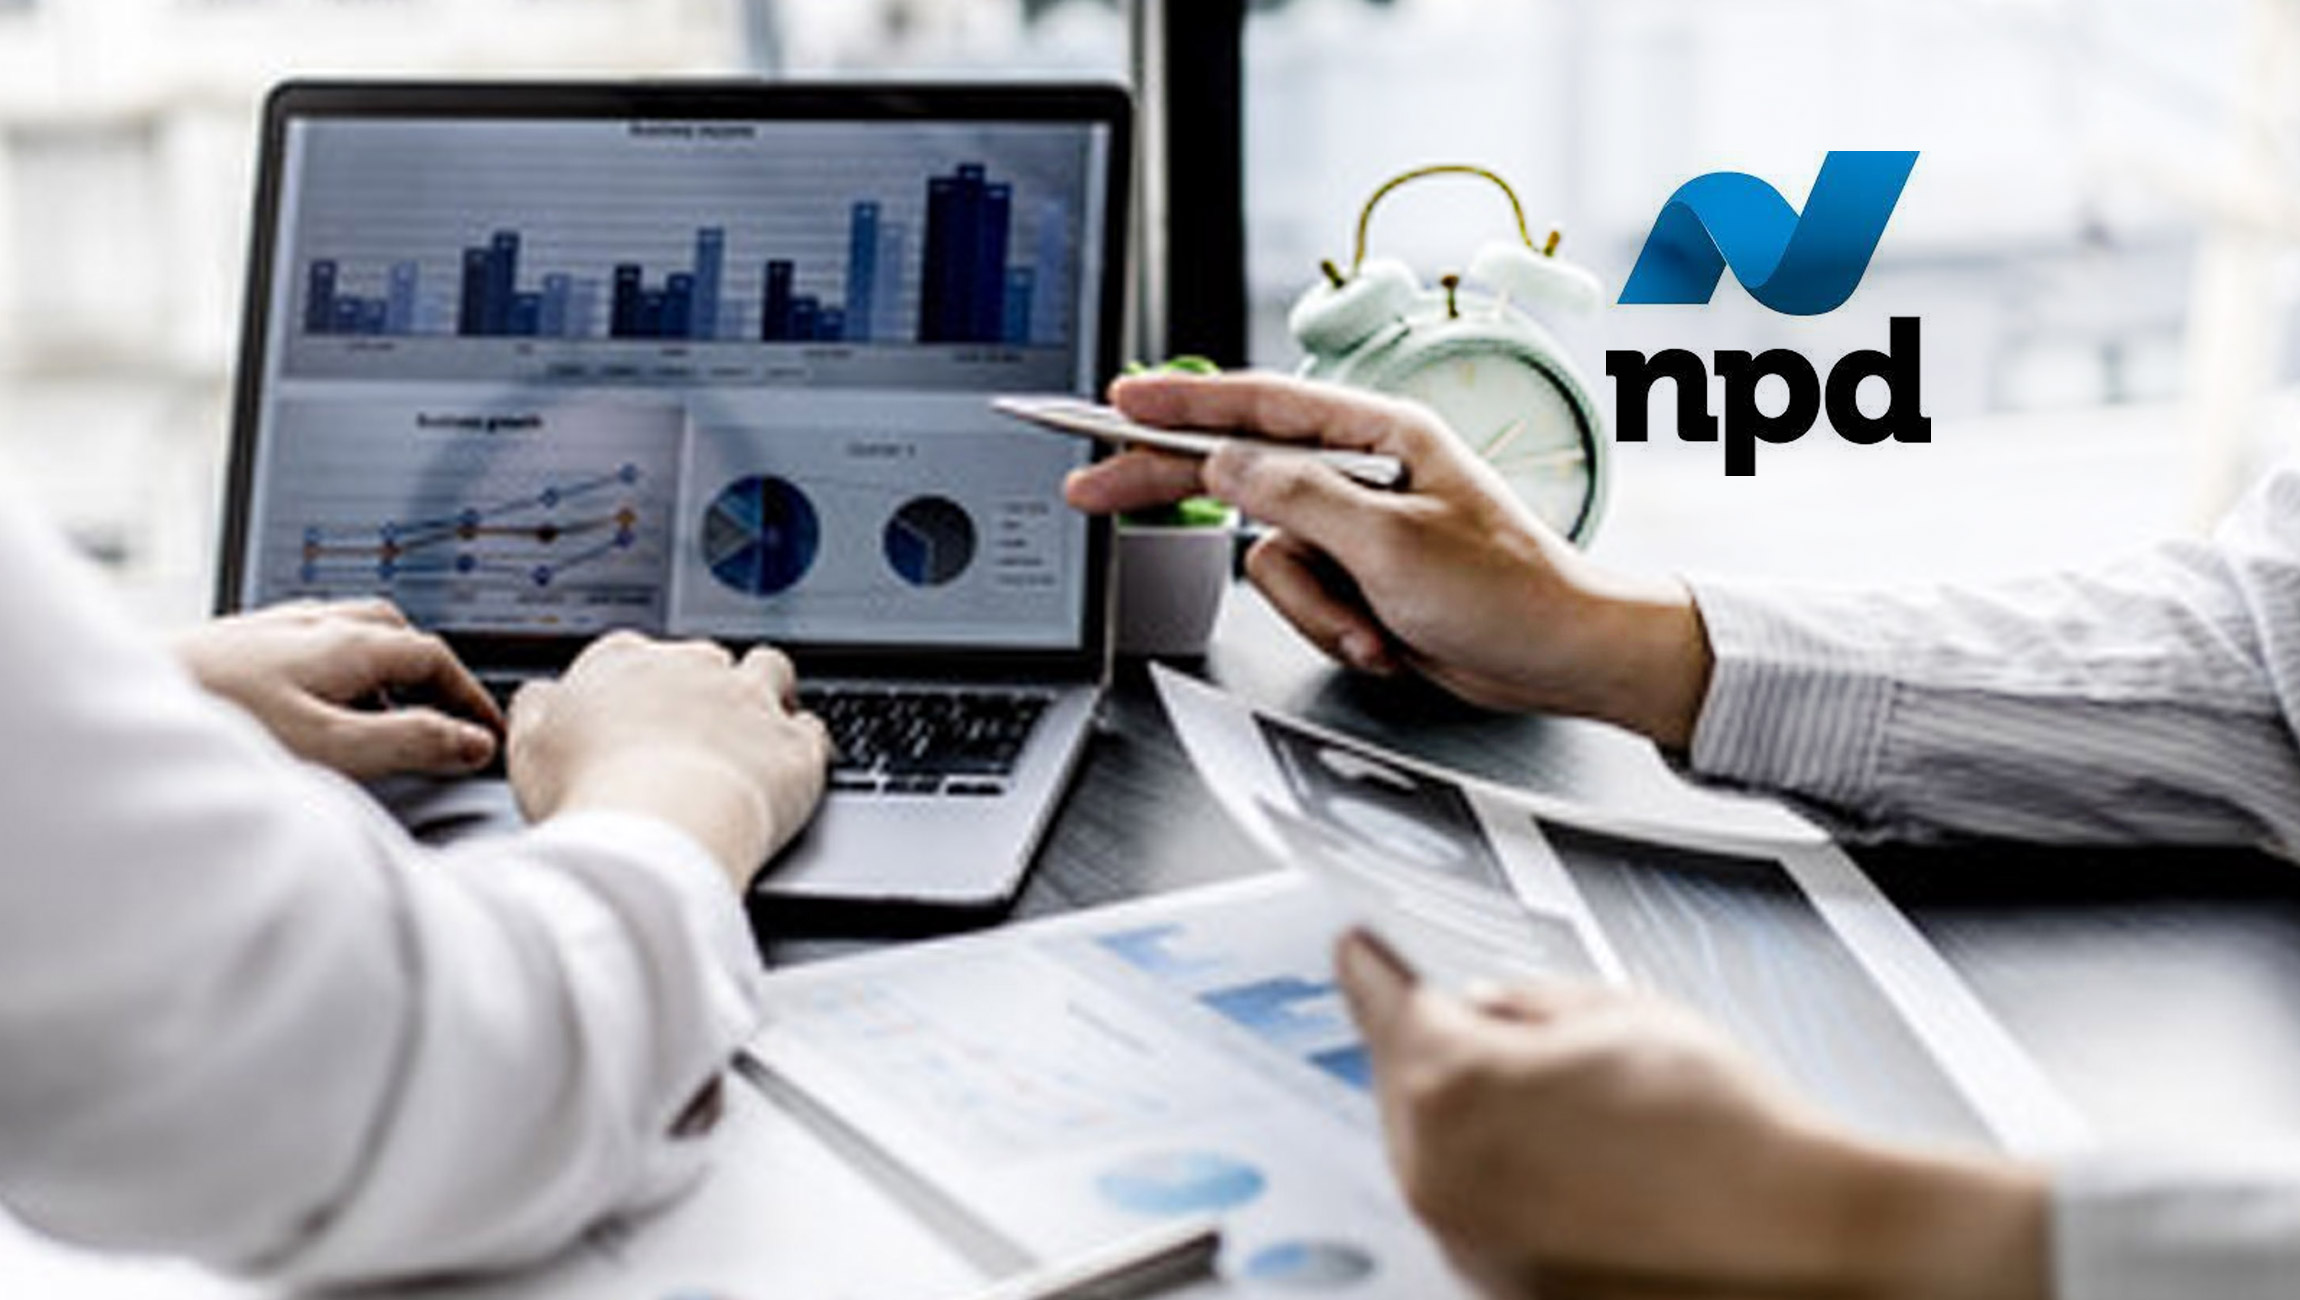 NPD: US B2B Technology Forecast Reveals Reseller Revenue and Unit Sales Growth Expected for 2022